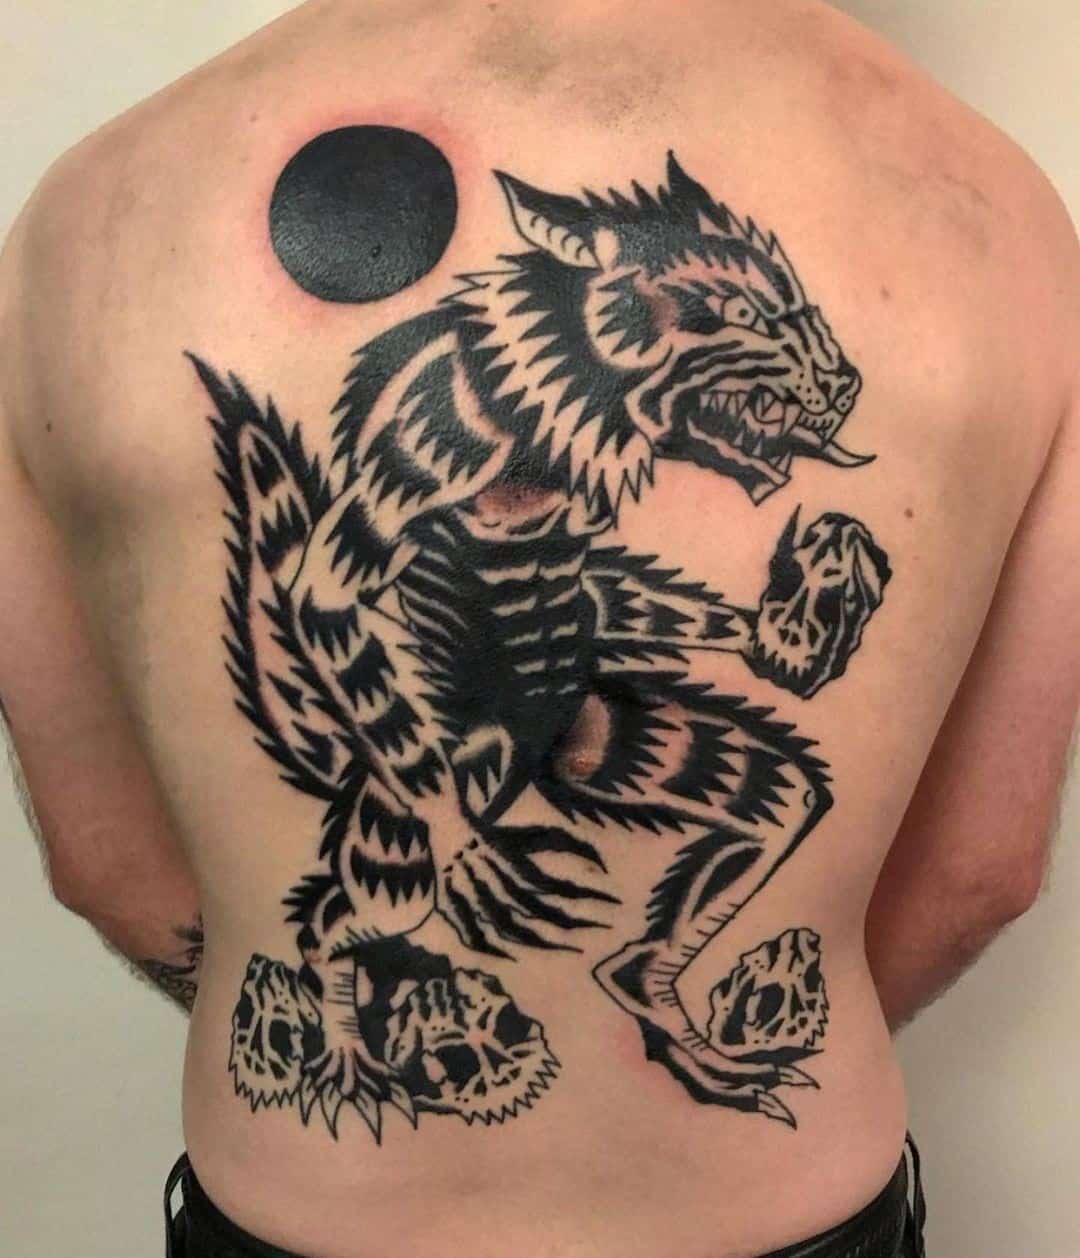 Share more than 137 black and grey wolf tattoo super hot